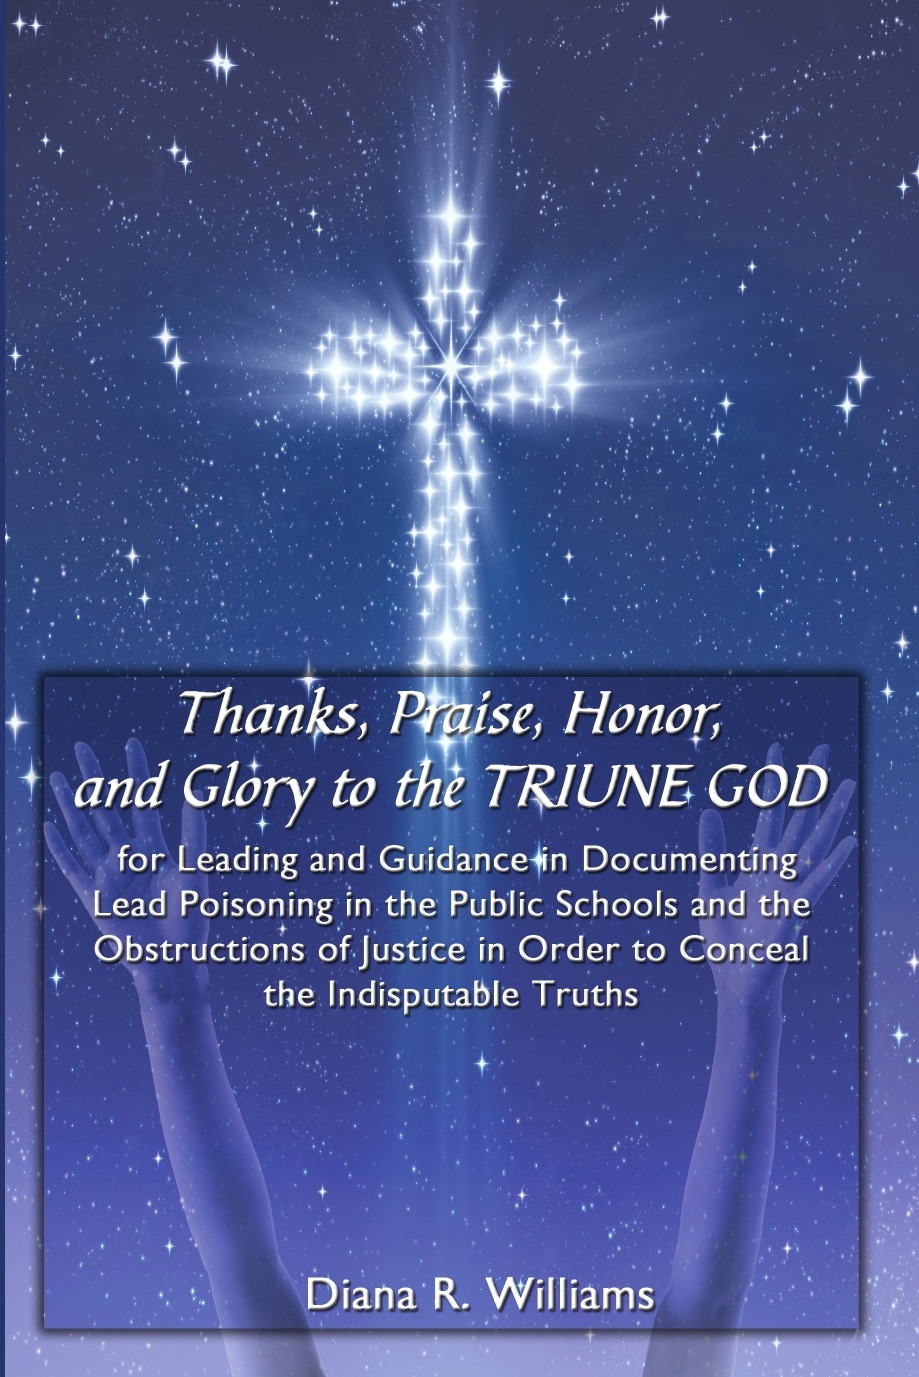 Thanks, Praise, Honor, and Glory to the TRIUNE GOD for Leading and Guidance in Documenting Lead Poisoning in the Public Schools and the Obstructions of Justice in Order to Conceal the Indisputable Truths